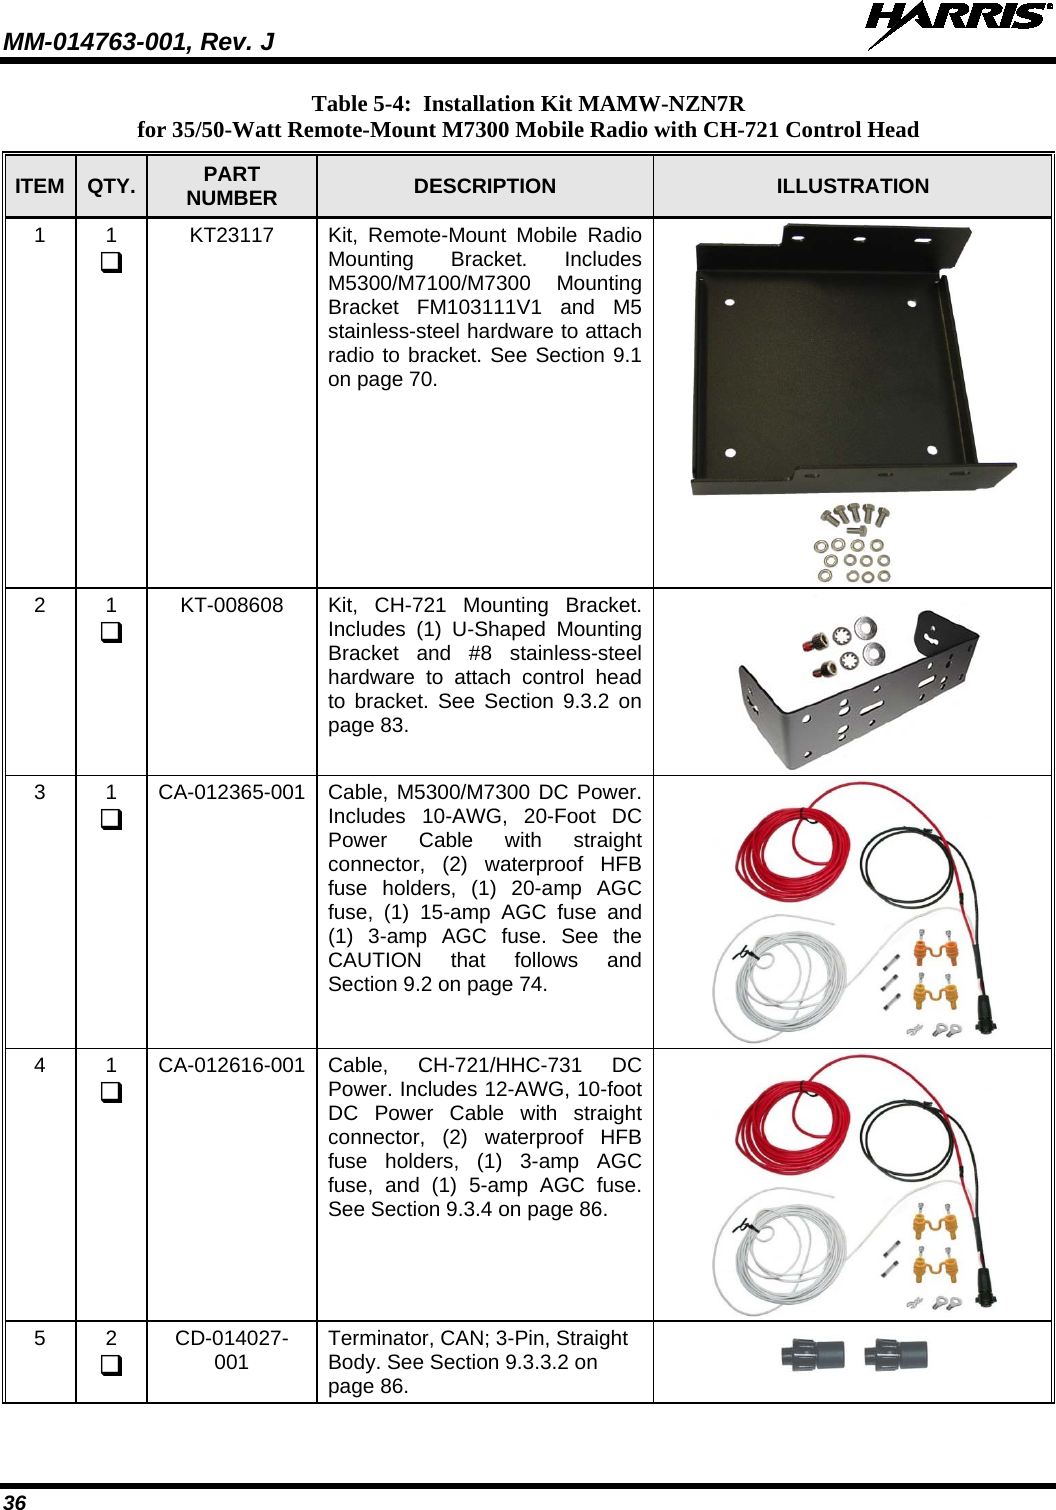 MM-014763-001, Rev. J   36 Table 5-4:  Installation Kit MAMW-NZN7R for 35/50-Watt Remote-Mount M7300 Mobile Radio with CH-721 Control Head ITEM QTY. PART NUMBER DESCRIPTION  ILLUSTRATION 1  1  KT23117 Kit, Remote-Mount Mobile Radio Mounting Bracket. Includes M5300/M7100/M7300 Mounting Bracket FM103111V1 and M5 stainless-steel hardware to attach radio to bracket. See Section 9.1 on page 70.  2  1  KT-008608 Kit, CH-721 Mounting Bracket. Includes (1) U-Shaped Mounting Bracket and #8 stainless-steel hardware to attach control head to bracket. See Section 9.3.2 on page 83.  3  1  CA-012365-001 Cable, M5300/M7300 DC Power. Includes 10-AWG, 20-Foot DC Power Cable with straight connector, (2) waterproof HFB fuse holders, (1)  20-amp AGC fuse,  (1) 15-amp AGC fuse and (1) 3-amp AGC fuse. See  the CAUTION that follows and Section 9.2 on page 74.  4  1  CA-012616-001 Cable, CH-721/HHC-731 DC Power. Includes 12-AWG, 10-foot DC Power Cable with straight connector, (2) waterproof HFB fuse holders, (1) 3-amp AGC fuse, and (1) 5-amp AGC fuse. See Section 9.3.4 on page 86.  5  2  CD-014027-001 Terminator, CAN; 3-Pin, Straight Body. See Section 9.3.3.2 on page 86.       